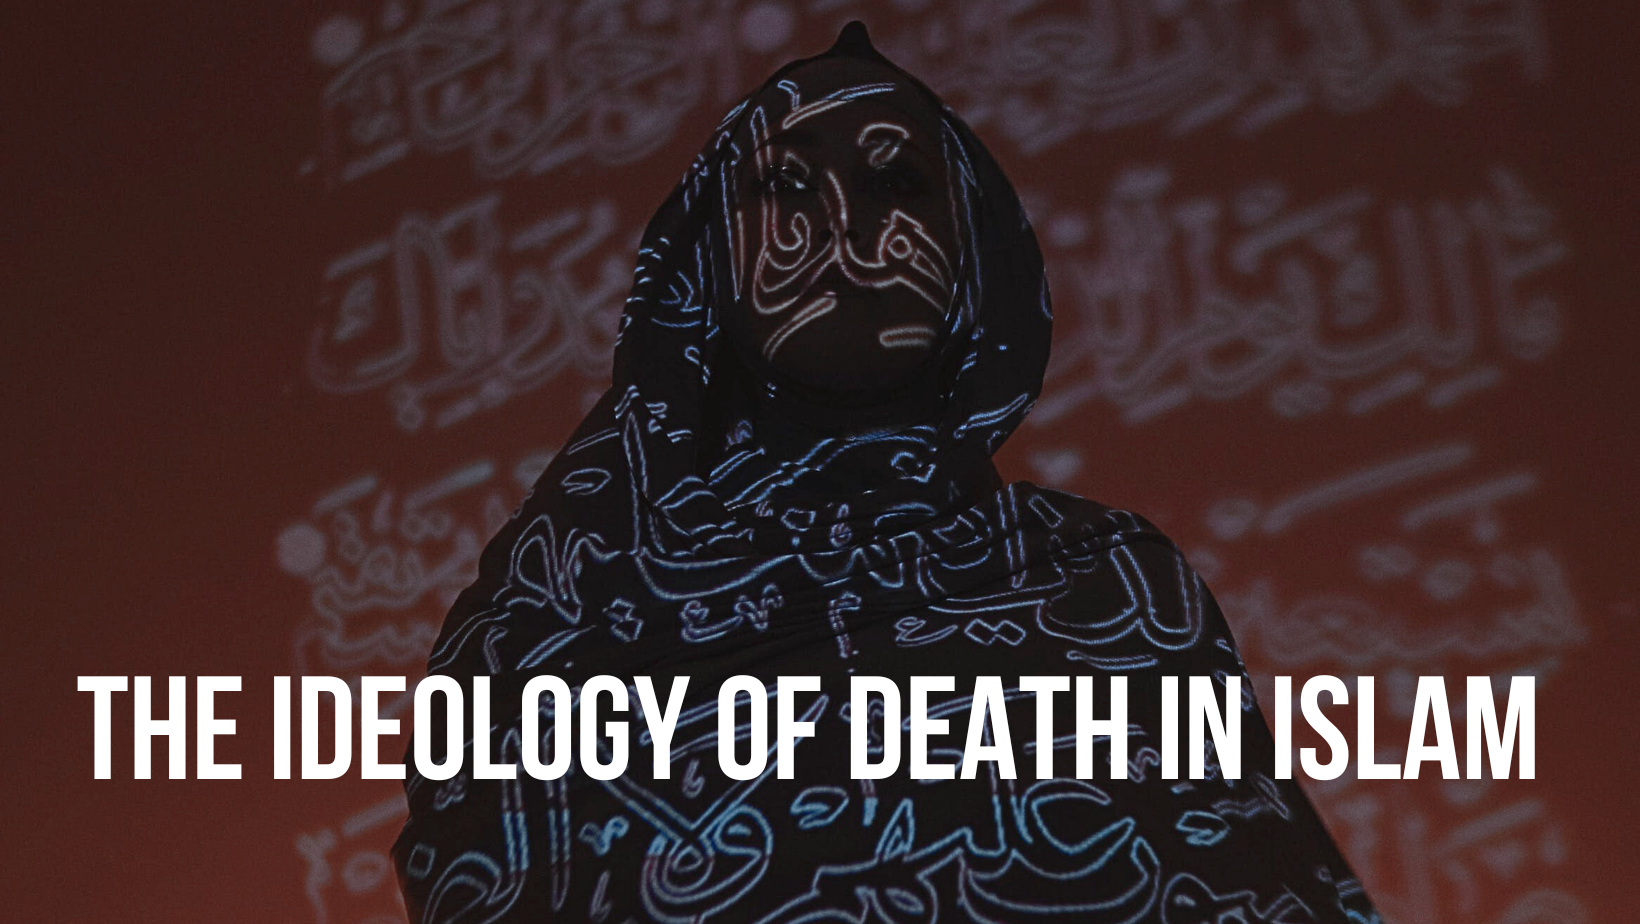 The ideology of death in Islam 